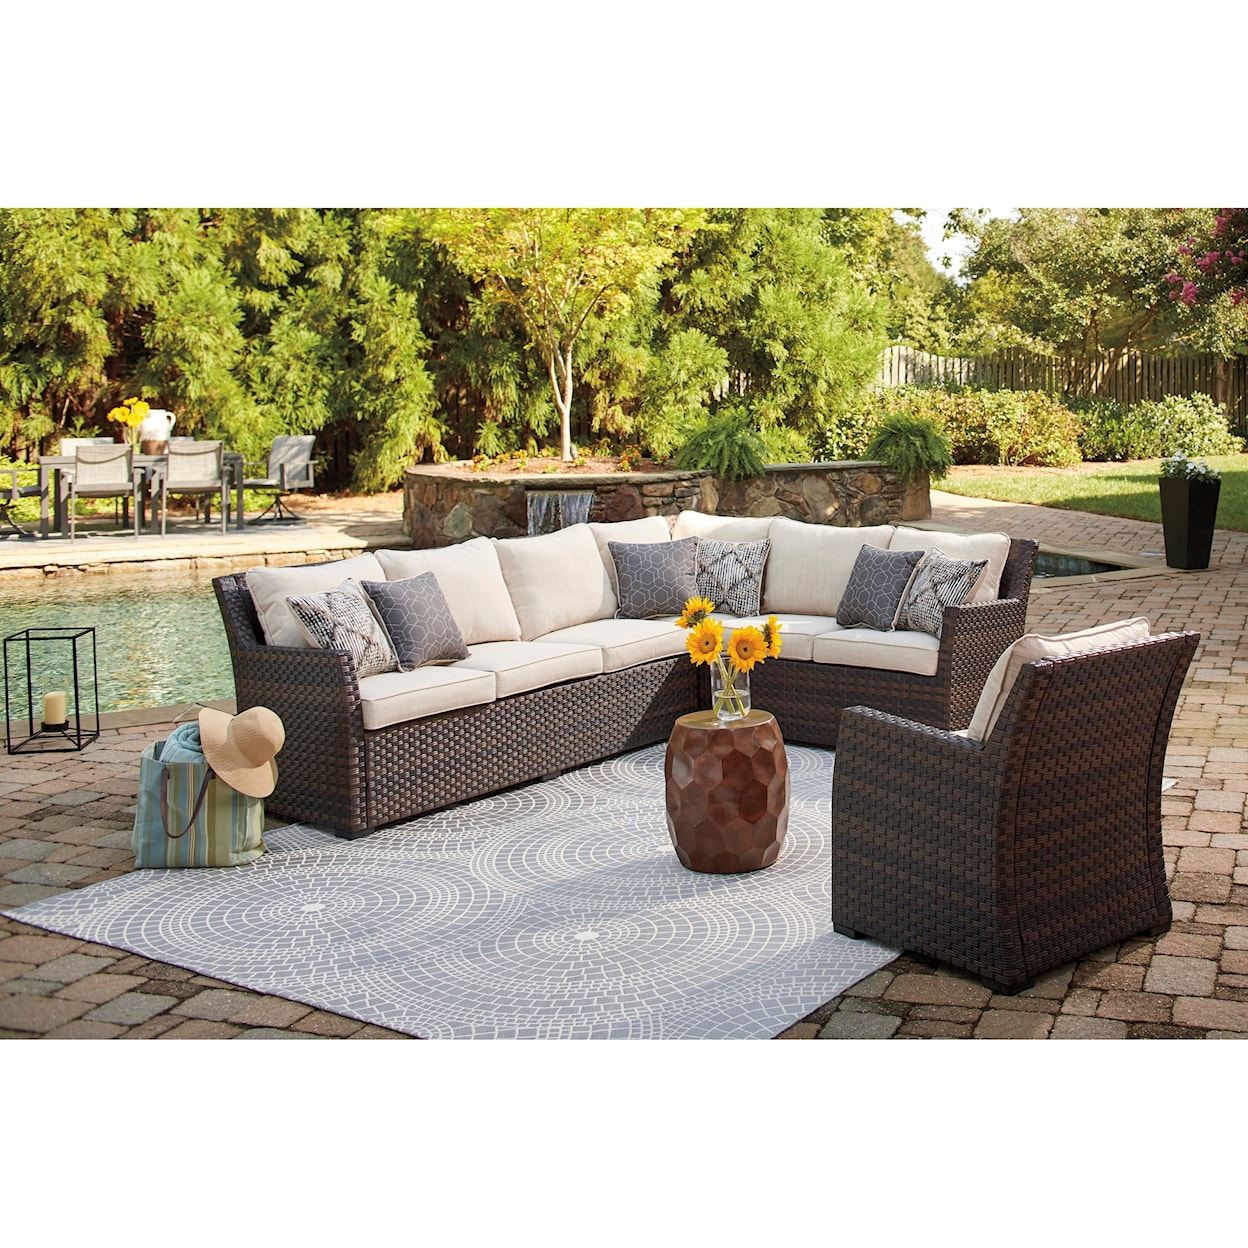 Ashley Furniture Signature Design Easy Isle Outdoor 2-Piece Sectional & 2 Lounge Chairs